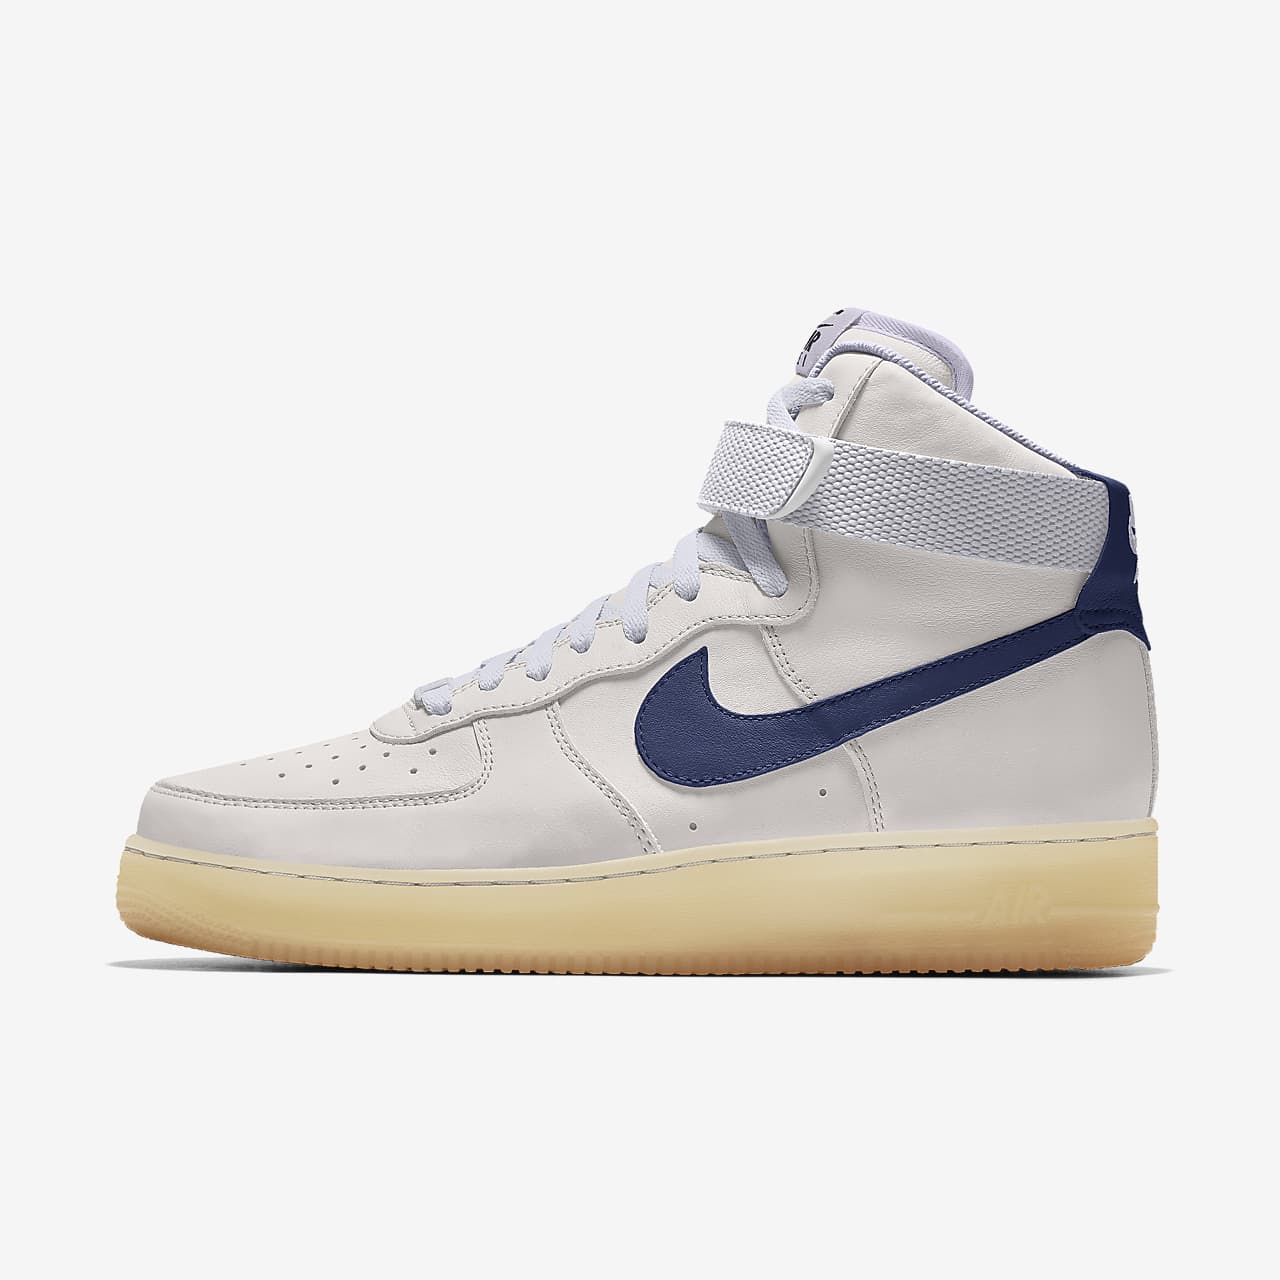 customize my own air force ones